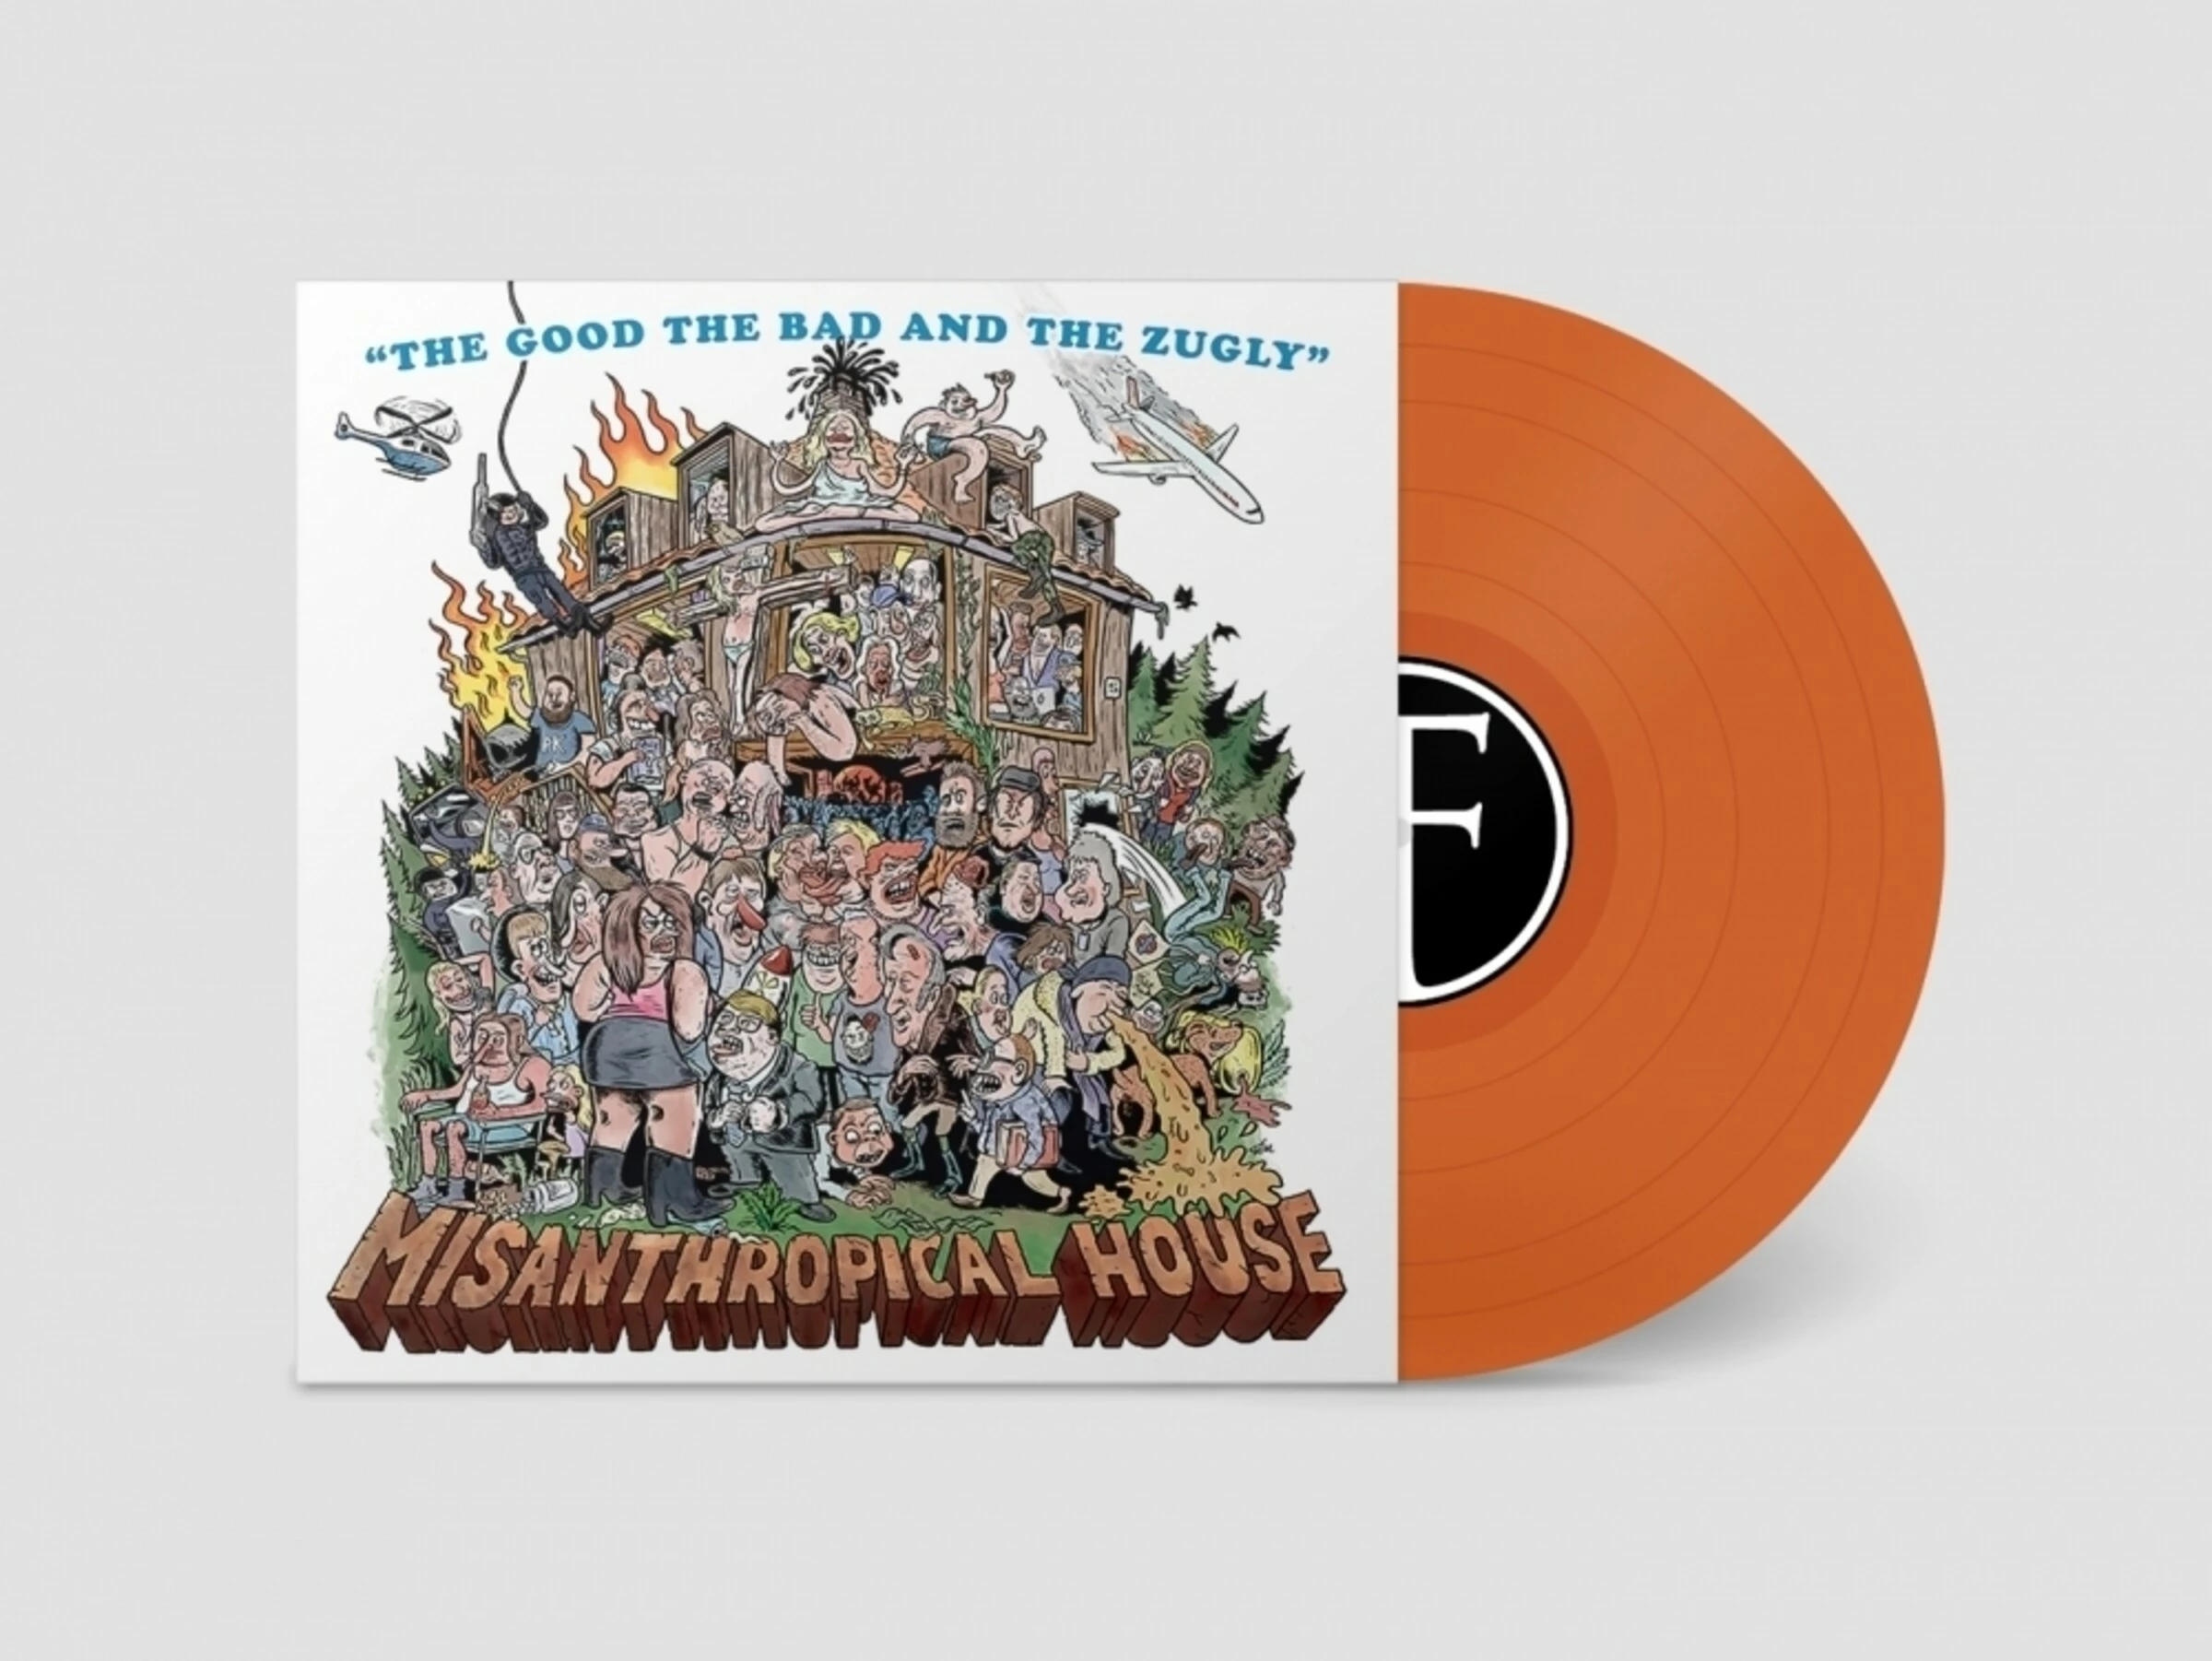 THE GOOD, THE BAD & THE ZUGLY - Misanthropical House [ORANGE VINYL LP]